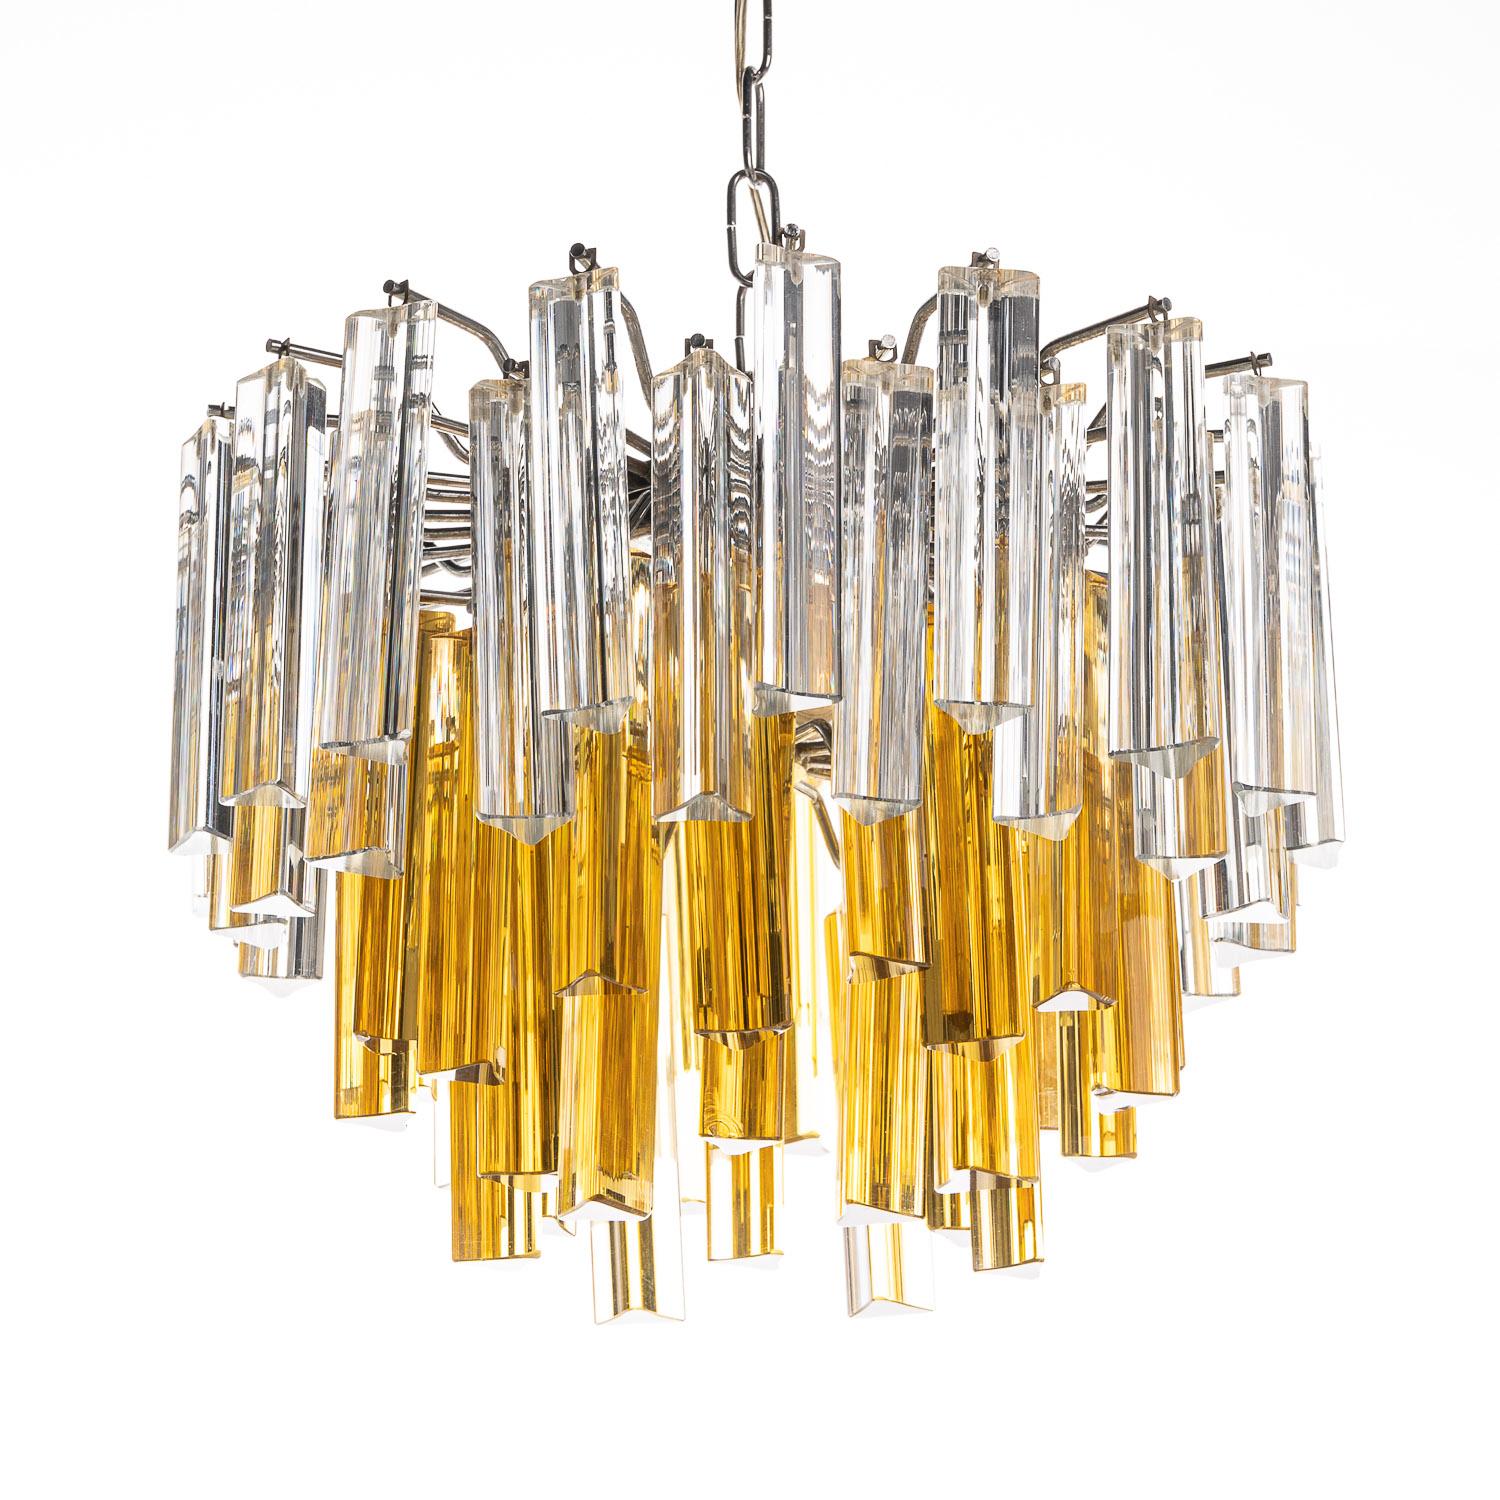 1960s Glass and Chrome Chandelier Attributed to Venini For Sale 8